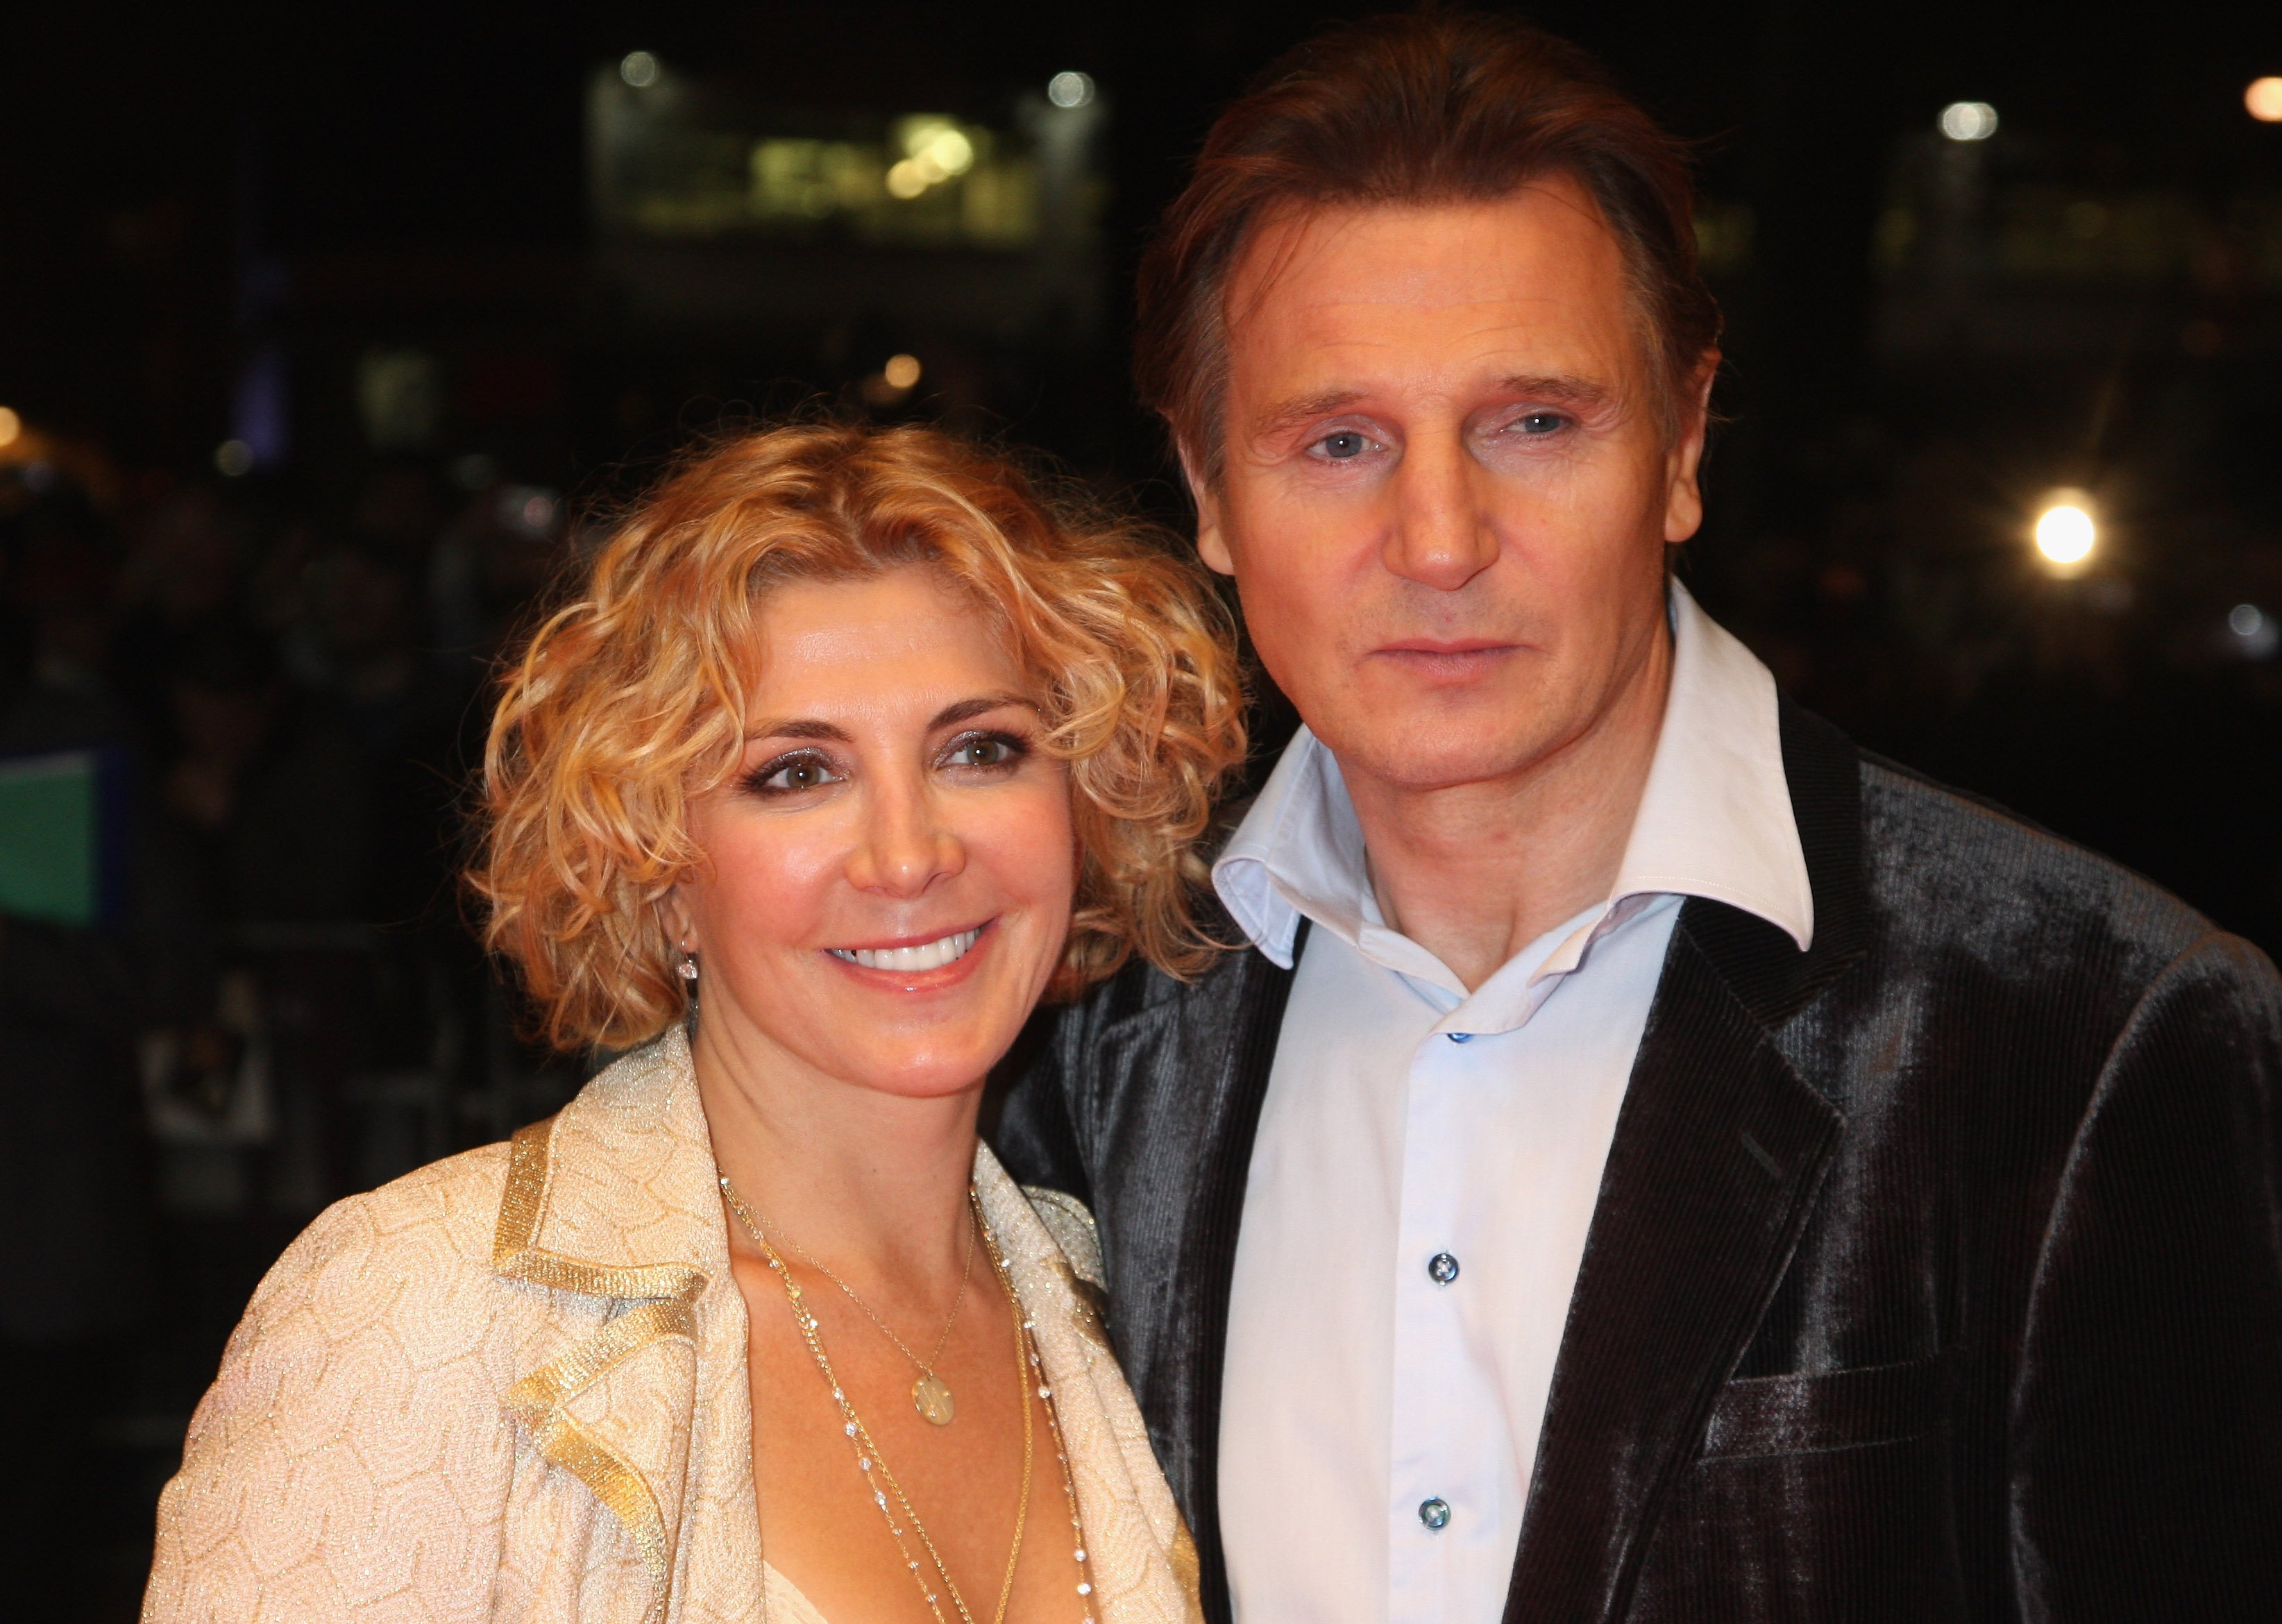 Liam Neeson and Natasha Richardson arriving at the BFI 52 London Film Festival: "The Other Man" premiere at the Odeon West End on October 17, 2008 in London, England. / Source: Getty Images